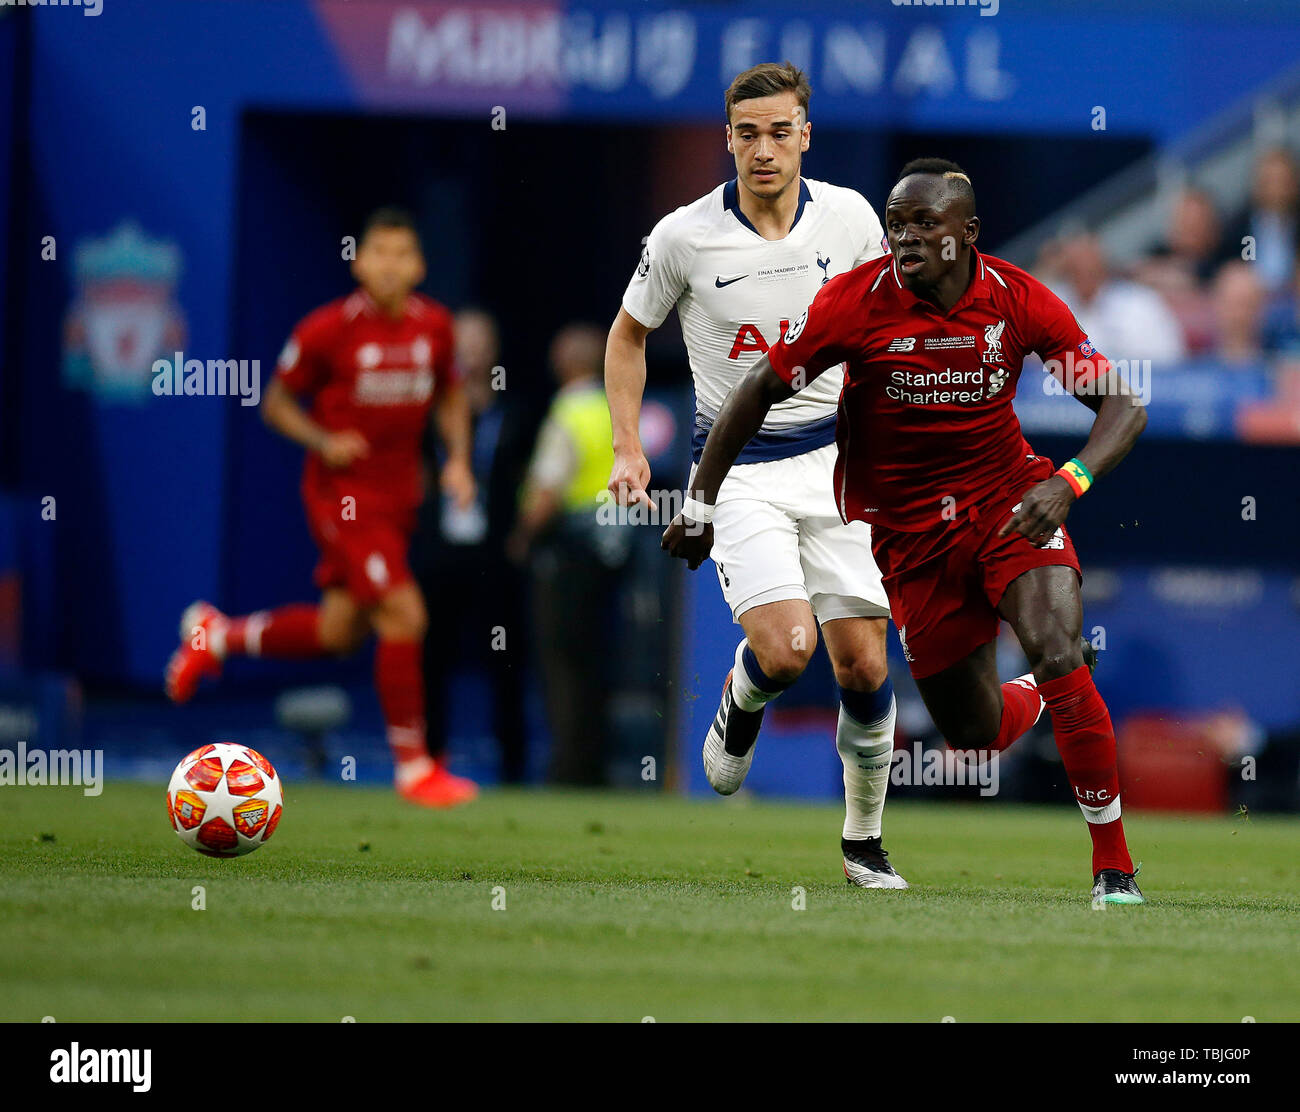 Madrid, Spain. 01st June, 2019. Liverpool's FC Sadio Mane seen in action during the Final Round of the UEFA Champions League match between Tottenham Hotspur FC and Liverpool FC at Wanda Metropolitano Stadium in Madrid. Final Score: Tottenham Hotspur FC 0 - 2 Liverpool FC. Credit: SOPA Images Limited/Alamy Live News Stock Photo